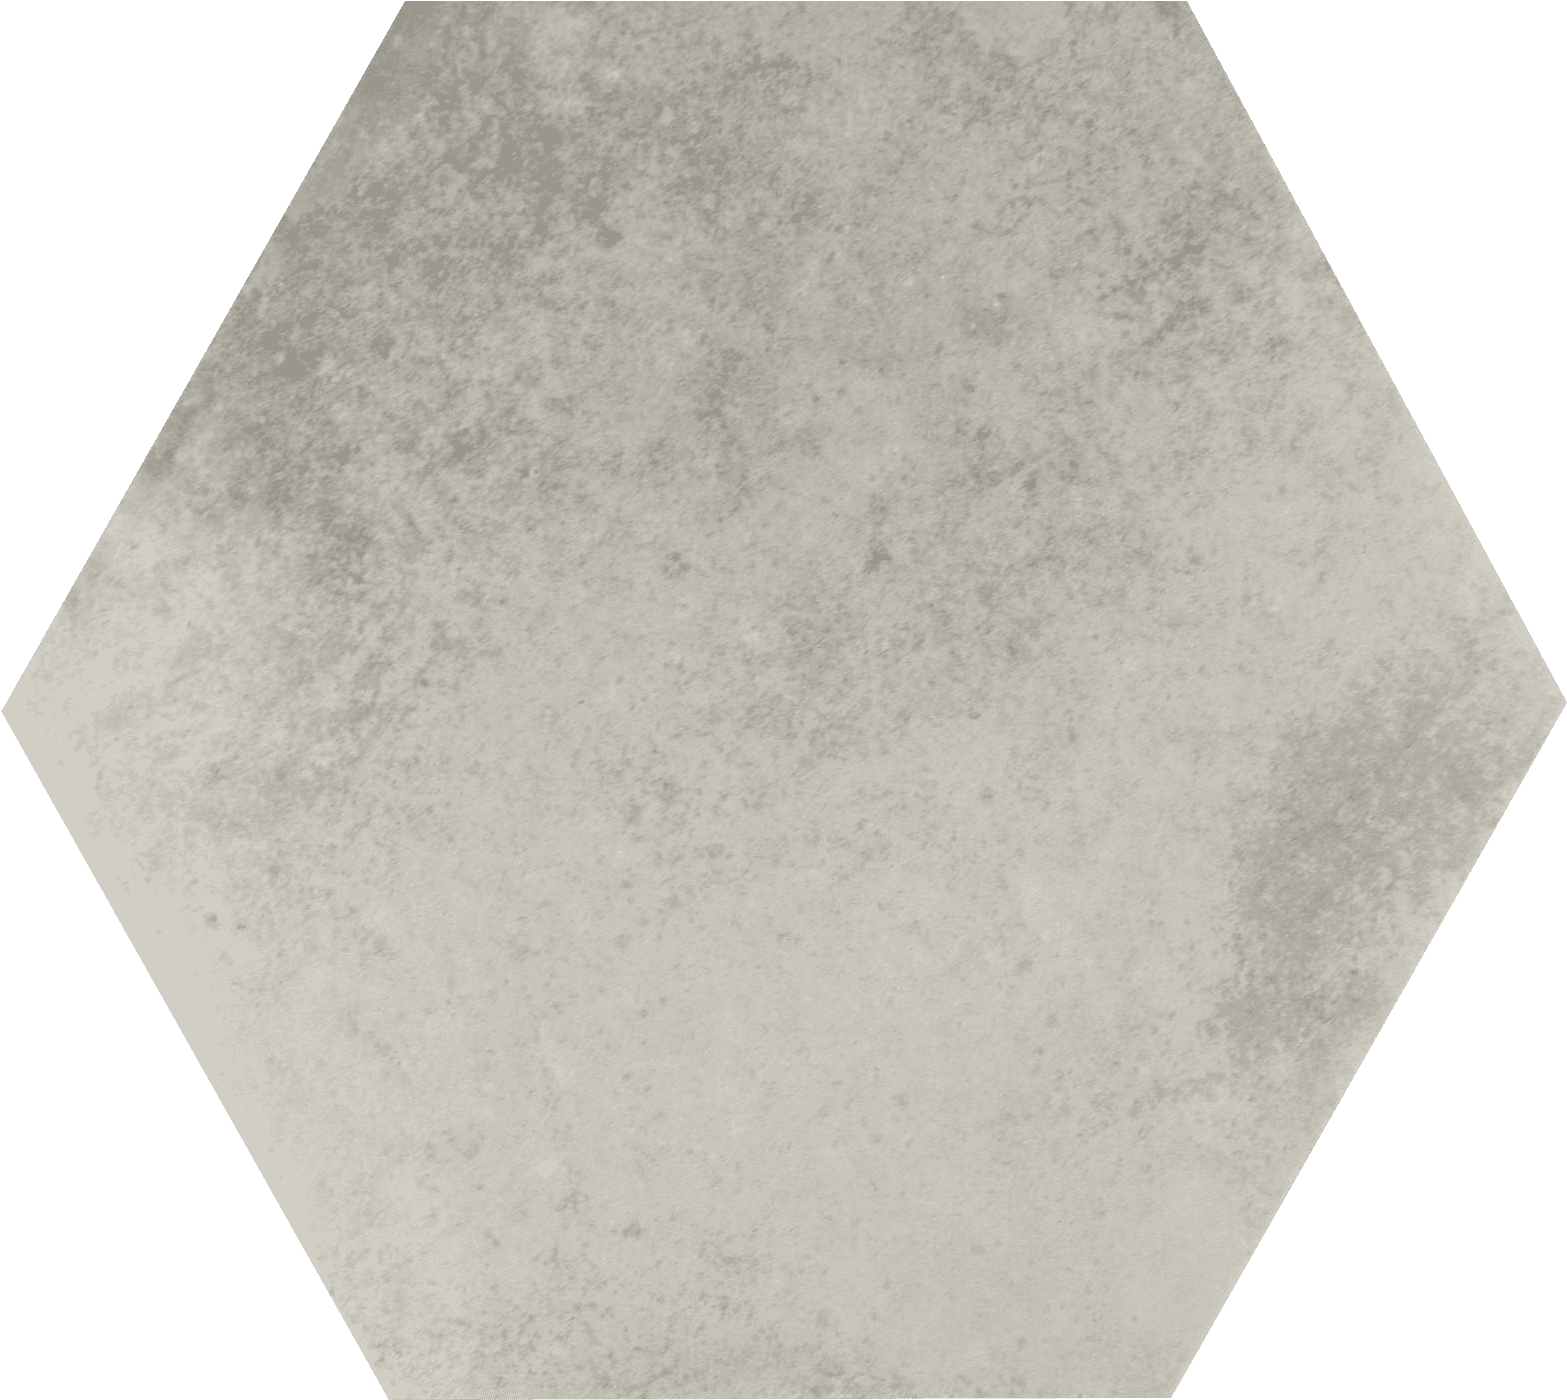 A Hexagon Shaped Tile With Black Background